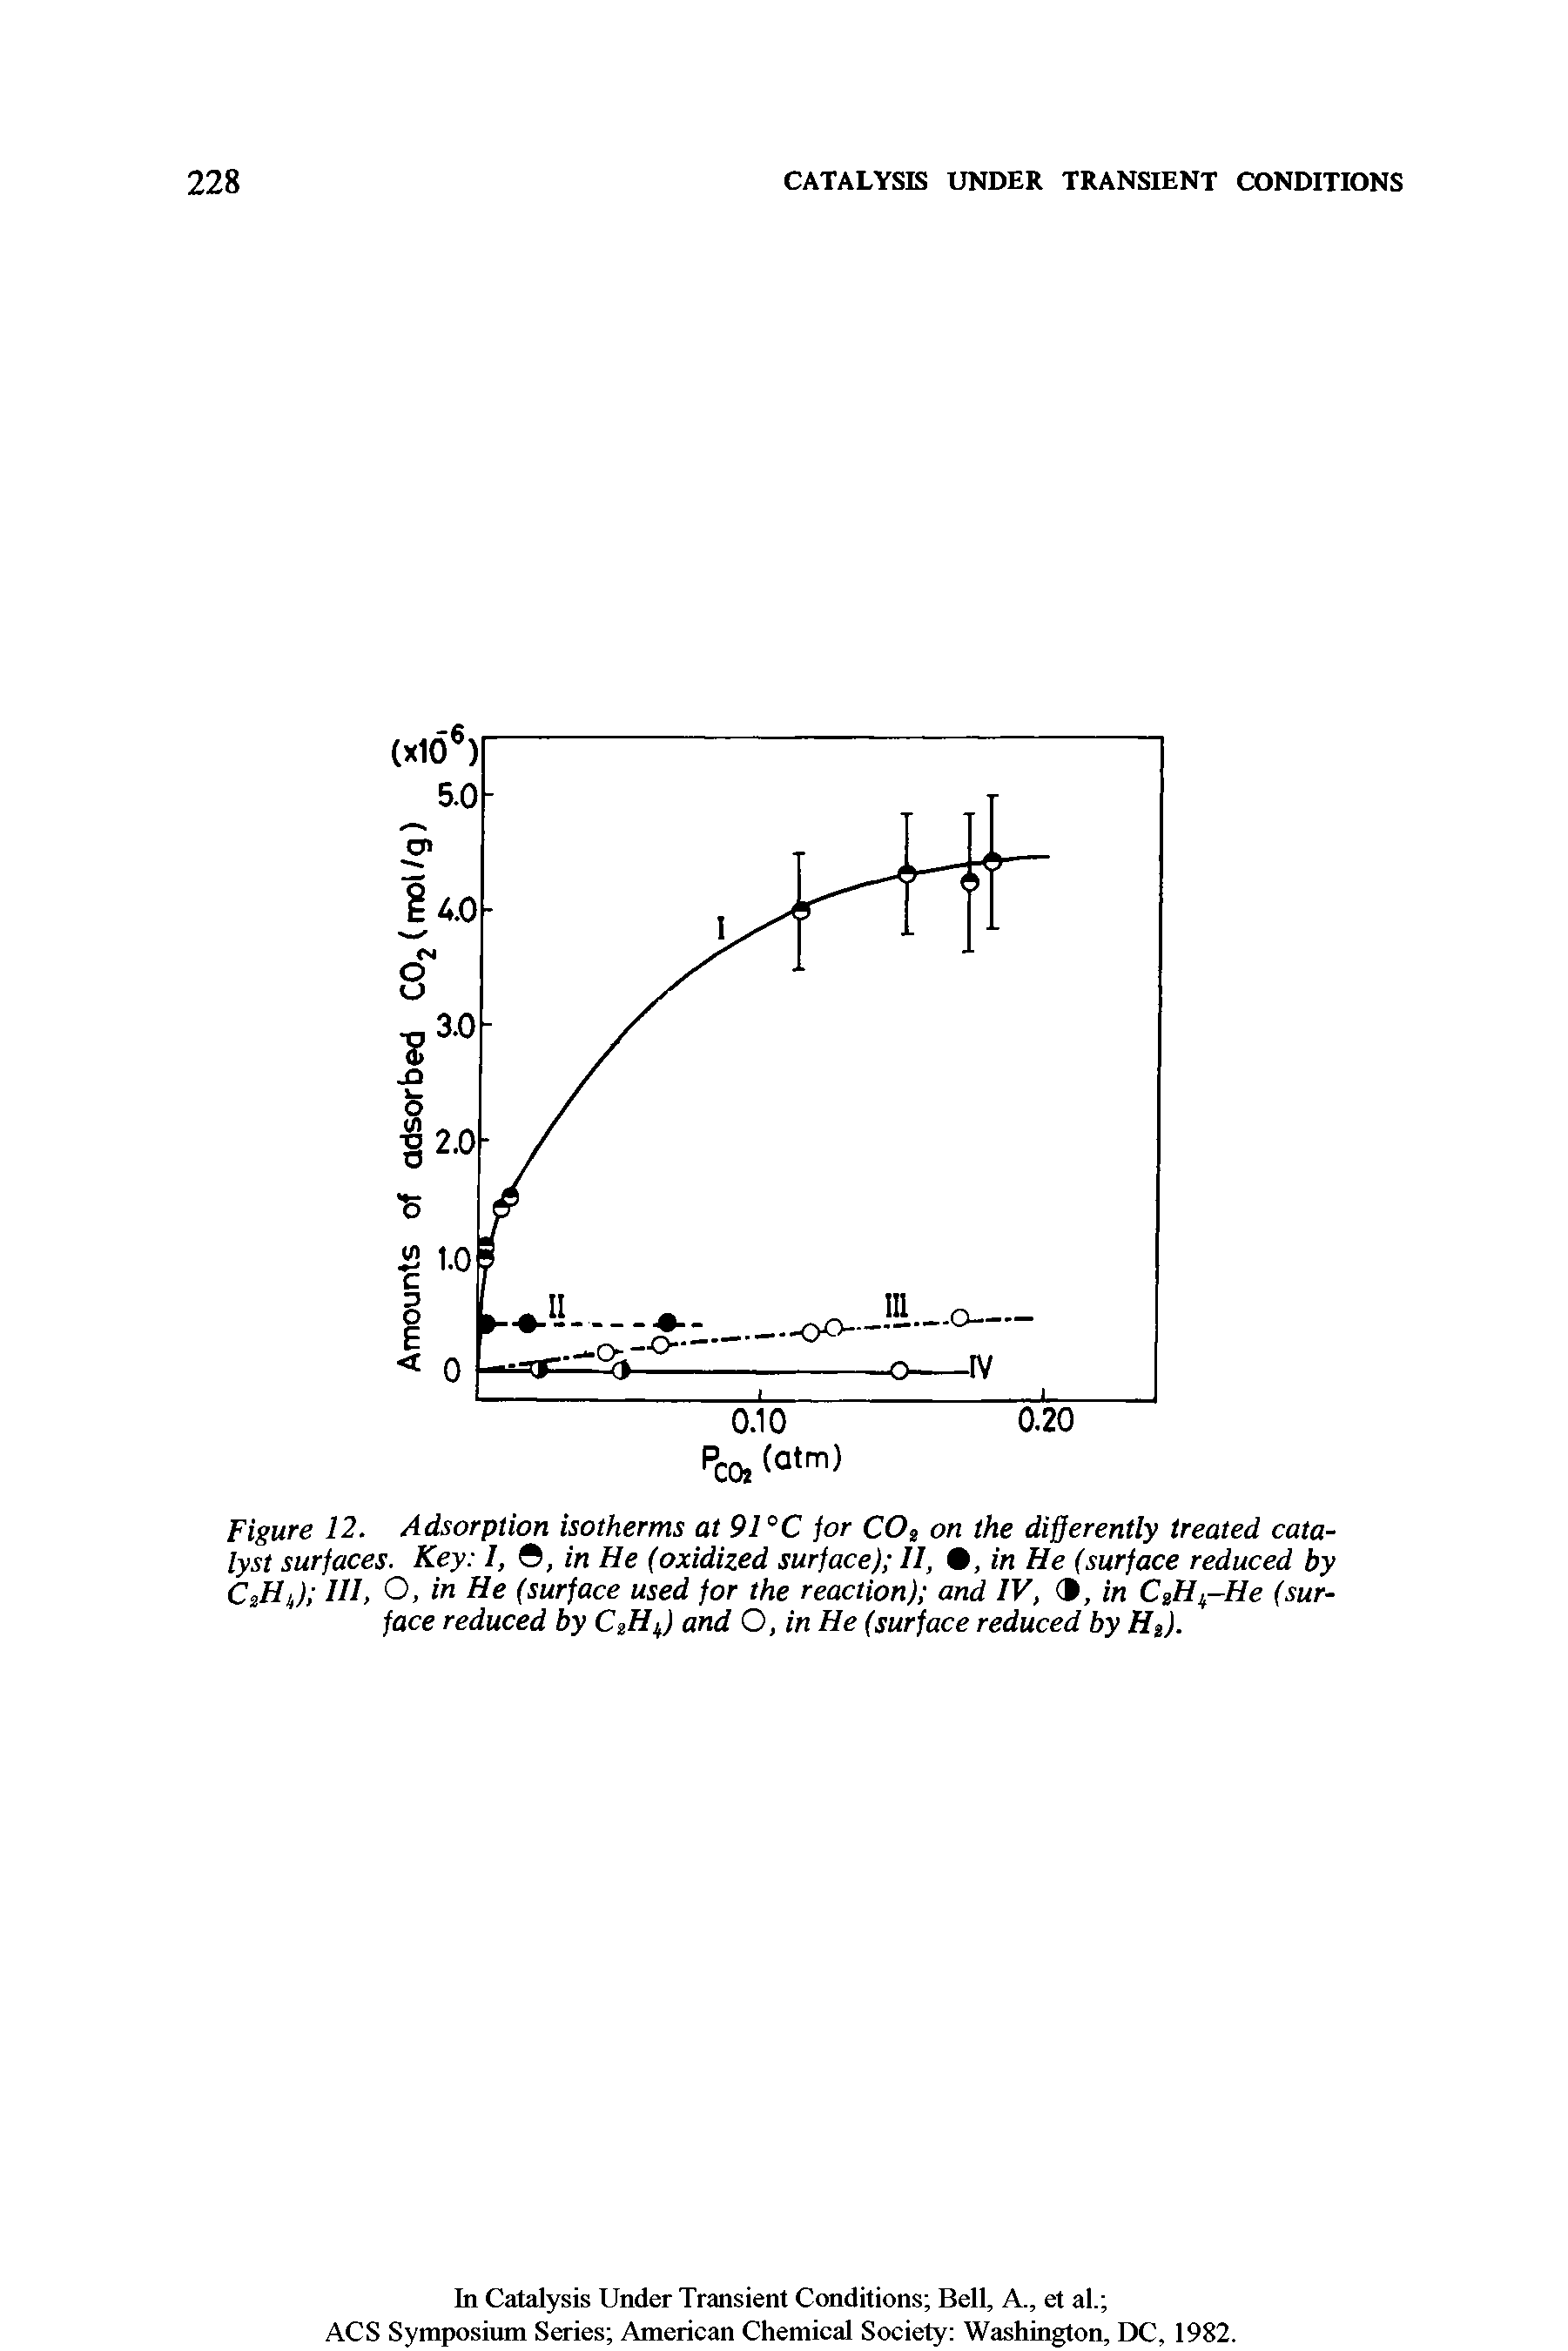 Figure 12. Adsorption isotherms at 91 °C for COs on the differently treated catalyst surfaces. Key I, , in He (oxidized surface) II, , in He (surface reduced by CtHJ HI, O, in He (surface used for the reaction) and IV, , in CeH -He (surface reduced by CtHk) and O, in He (surface reduced by Ht).